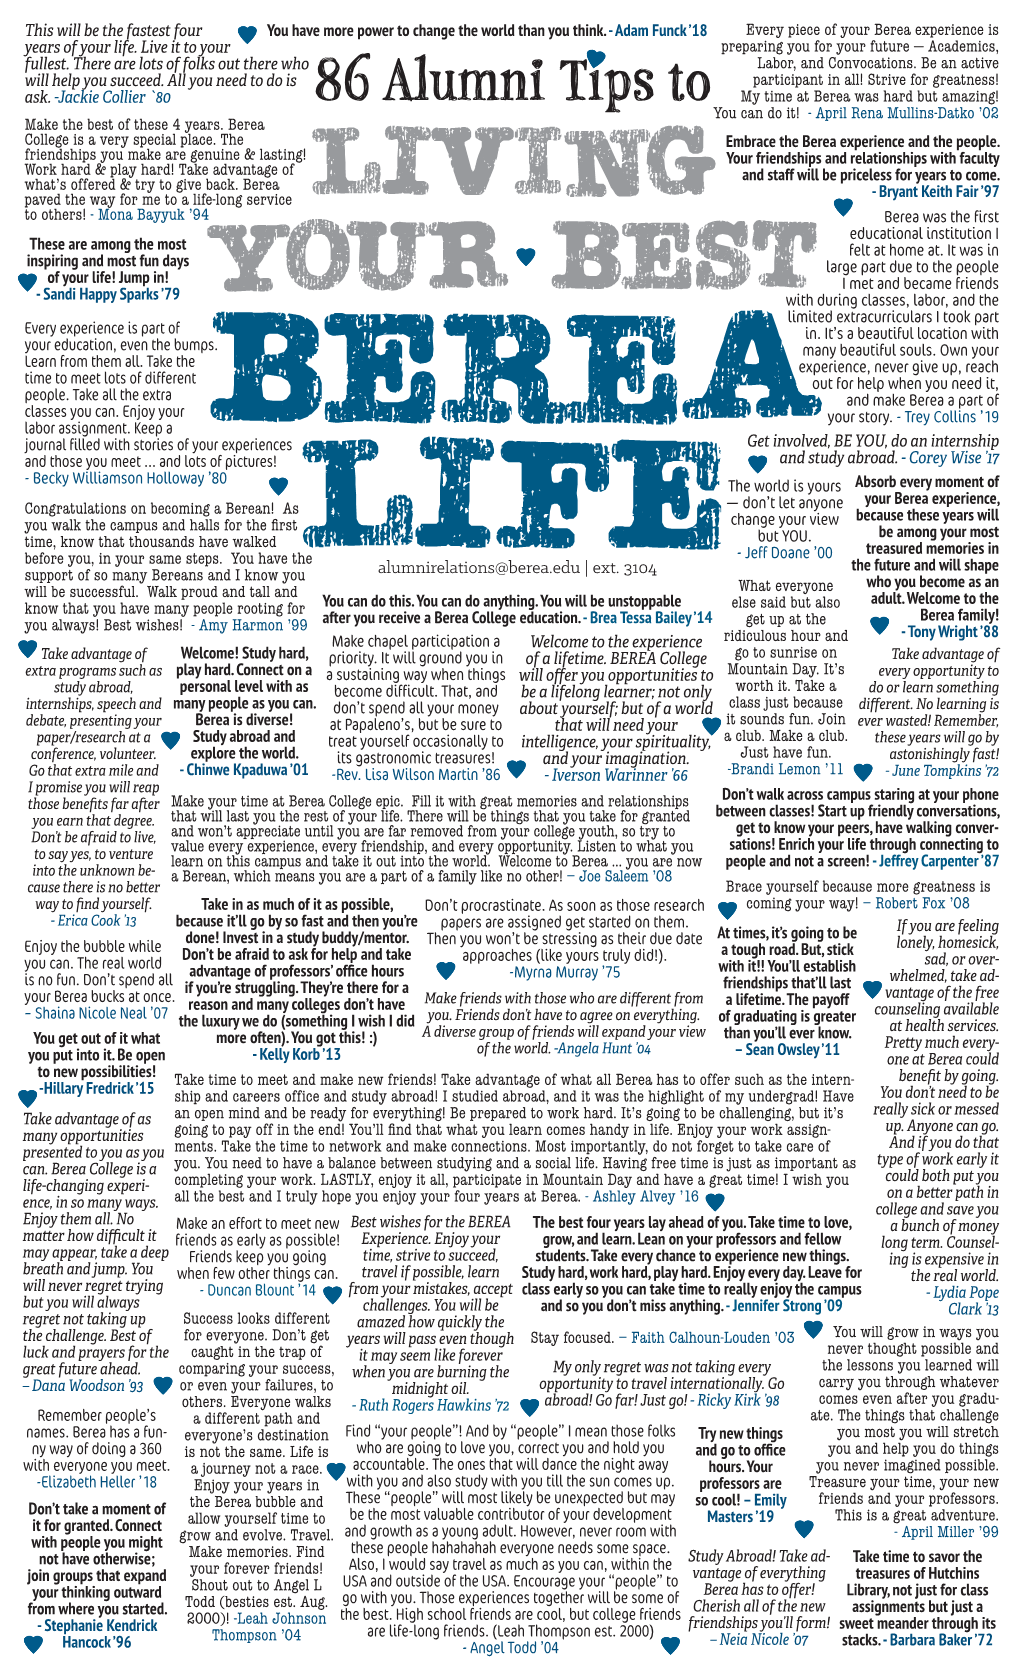 Tips to Living Your Best Berea Life